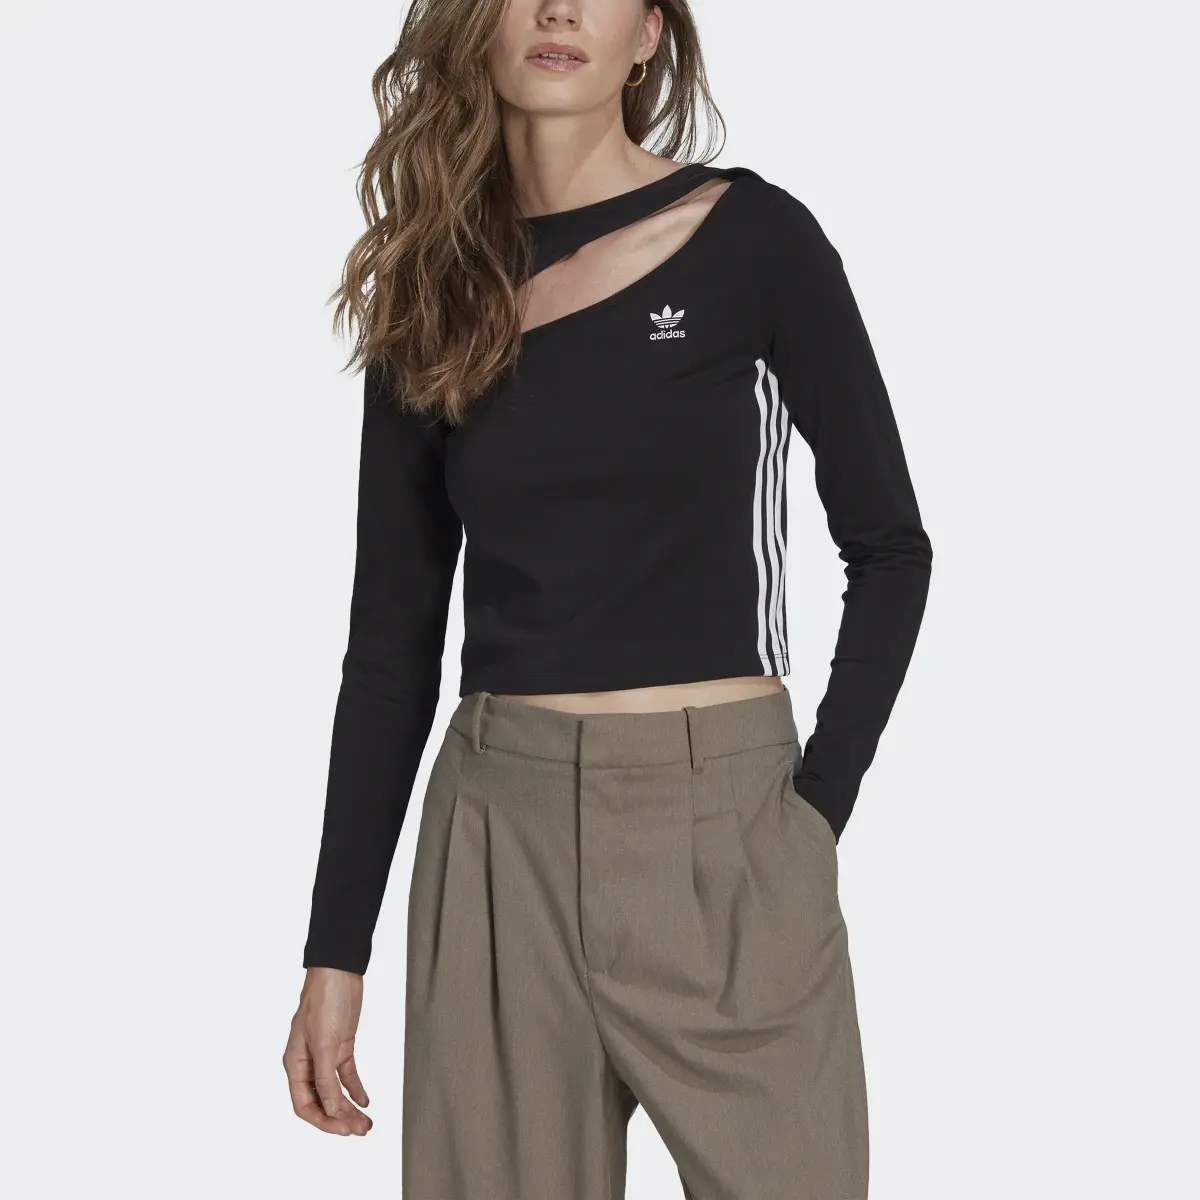 Adidas Centre Stage Cutout Top. 1